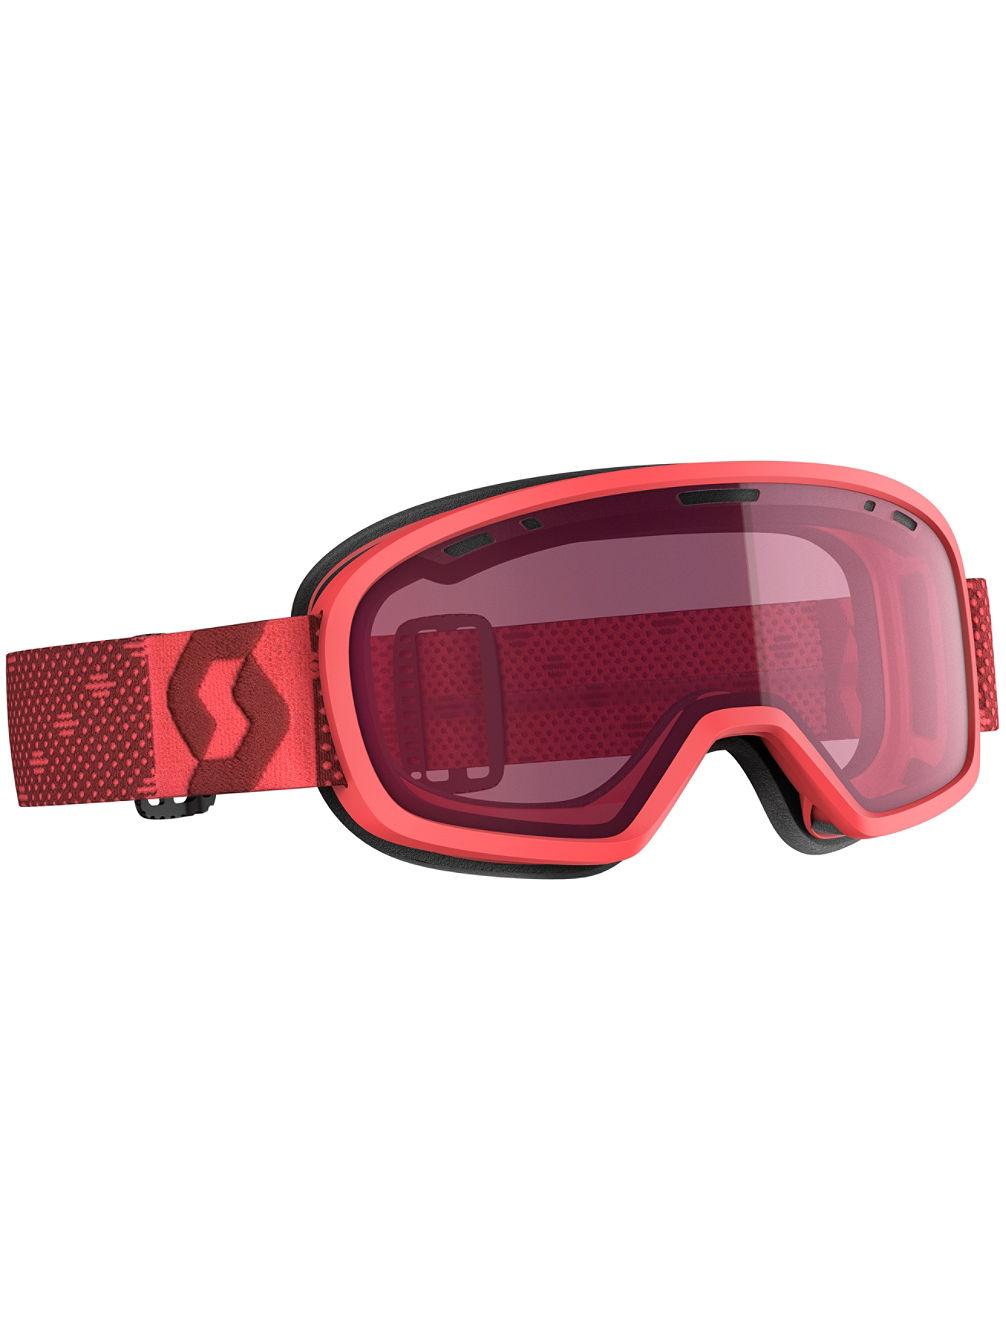 Muse Pink Goggle